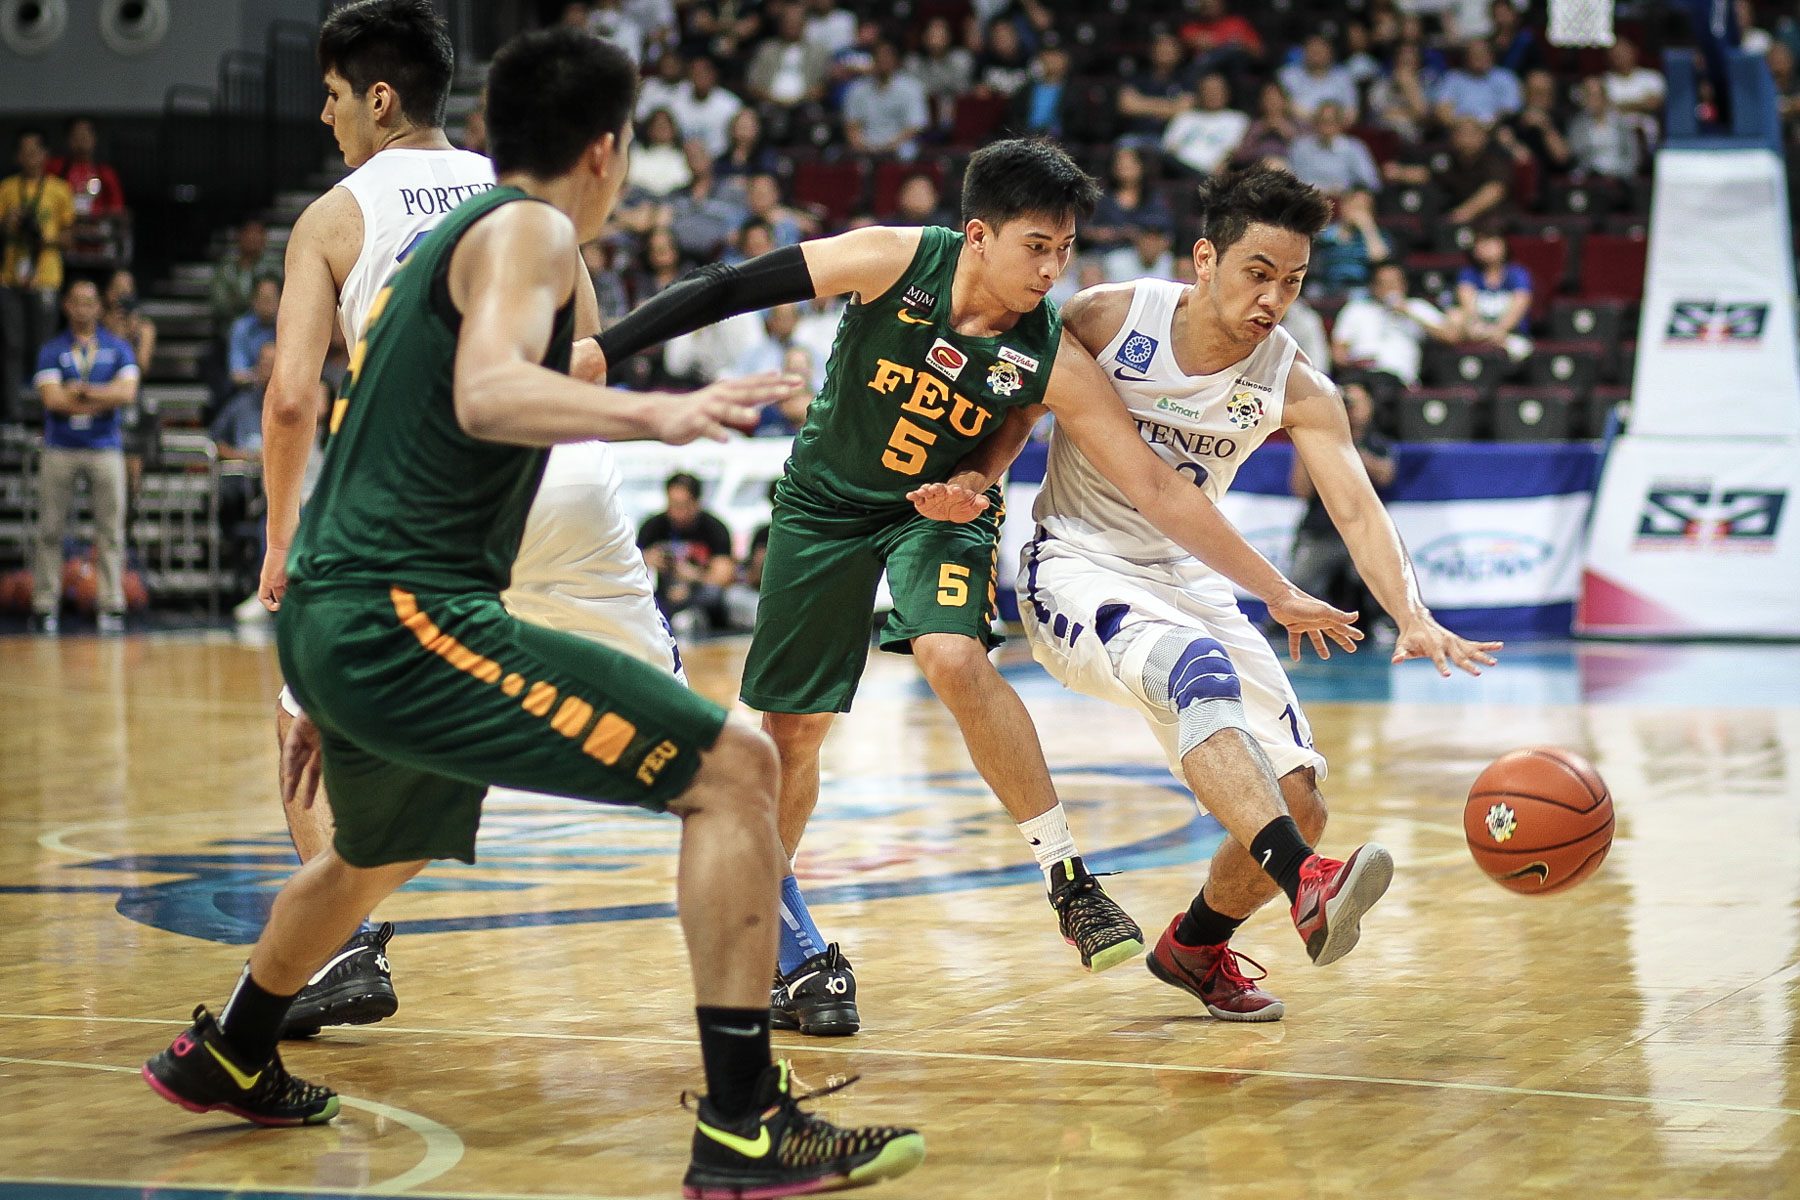 FEU hopes for consistency from UAAP refs ahead of Final Four vs Ateneo